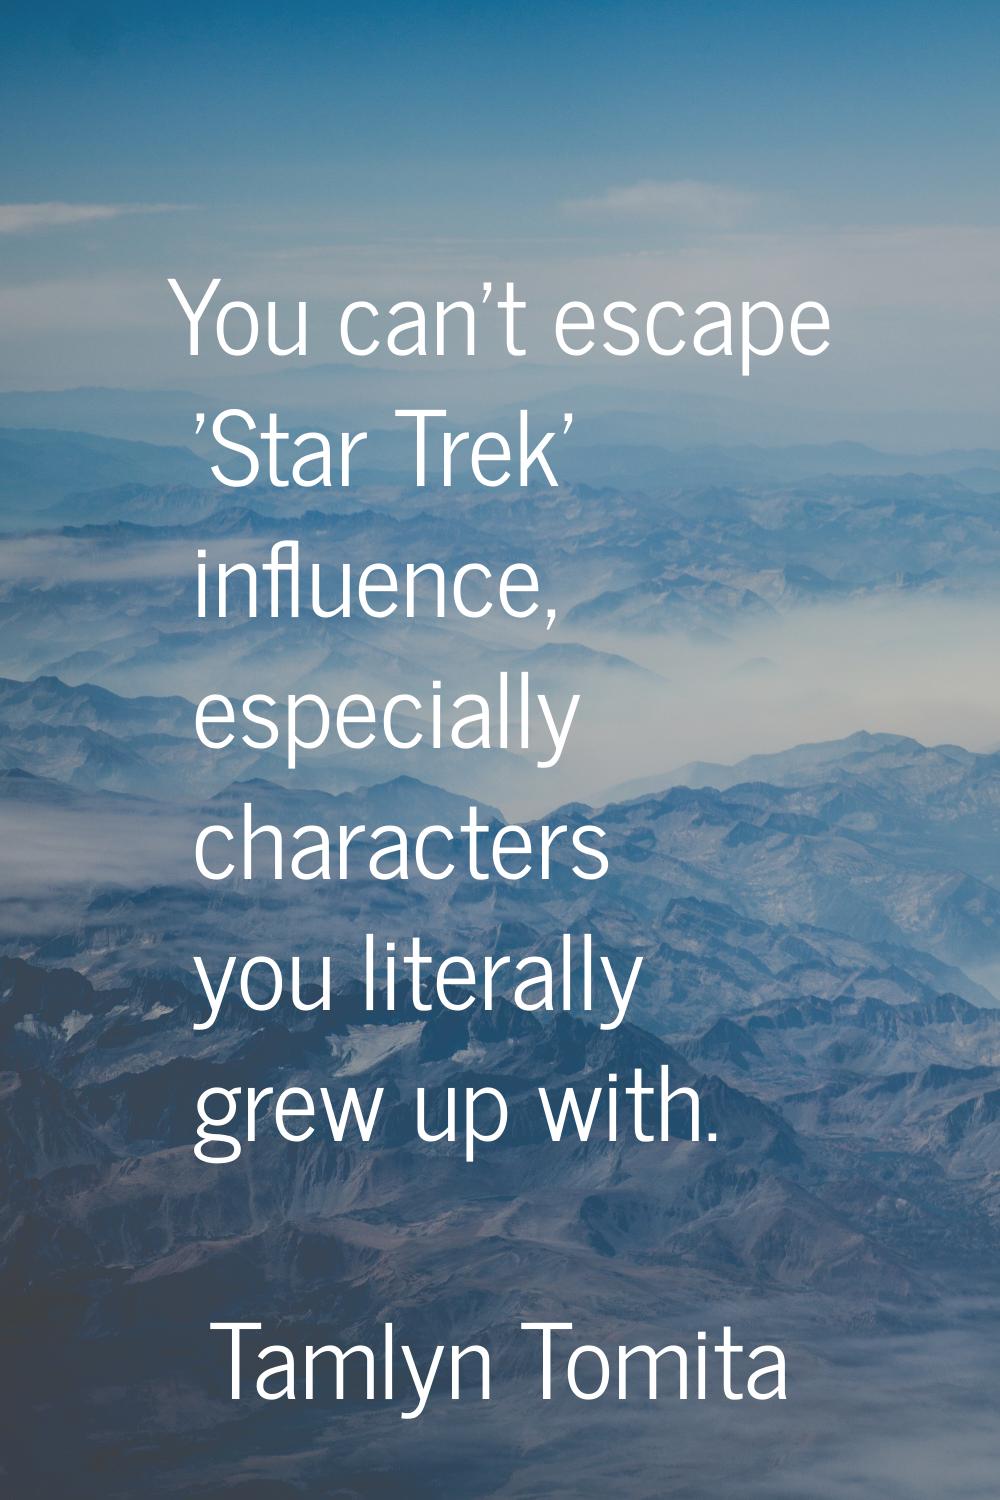 You can't escape 'Star Trek' influence, especially characters you literally grew up with.